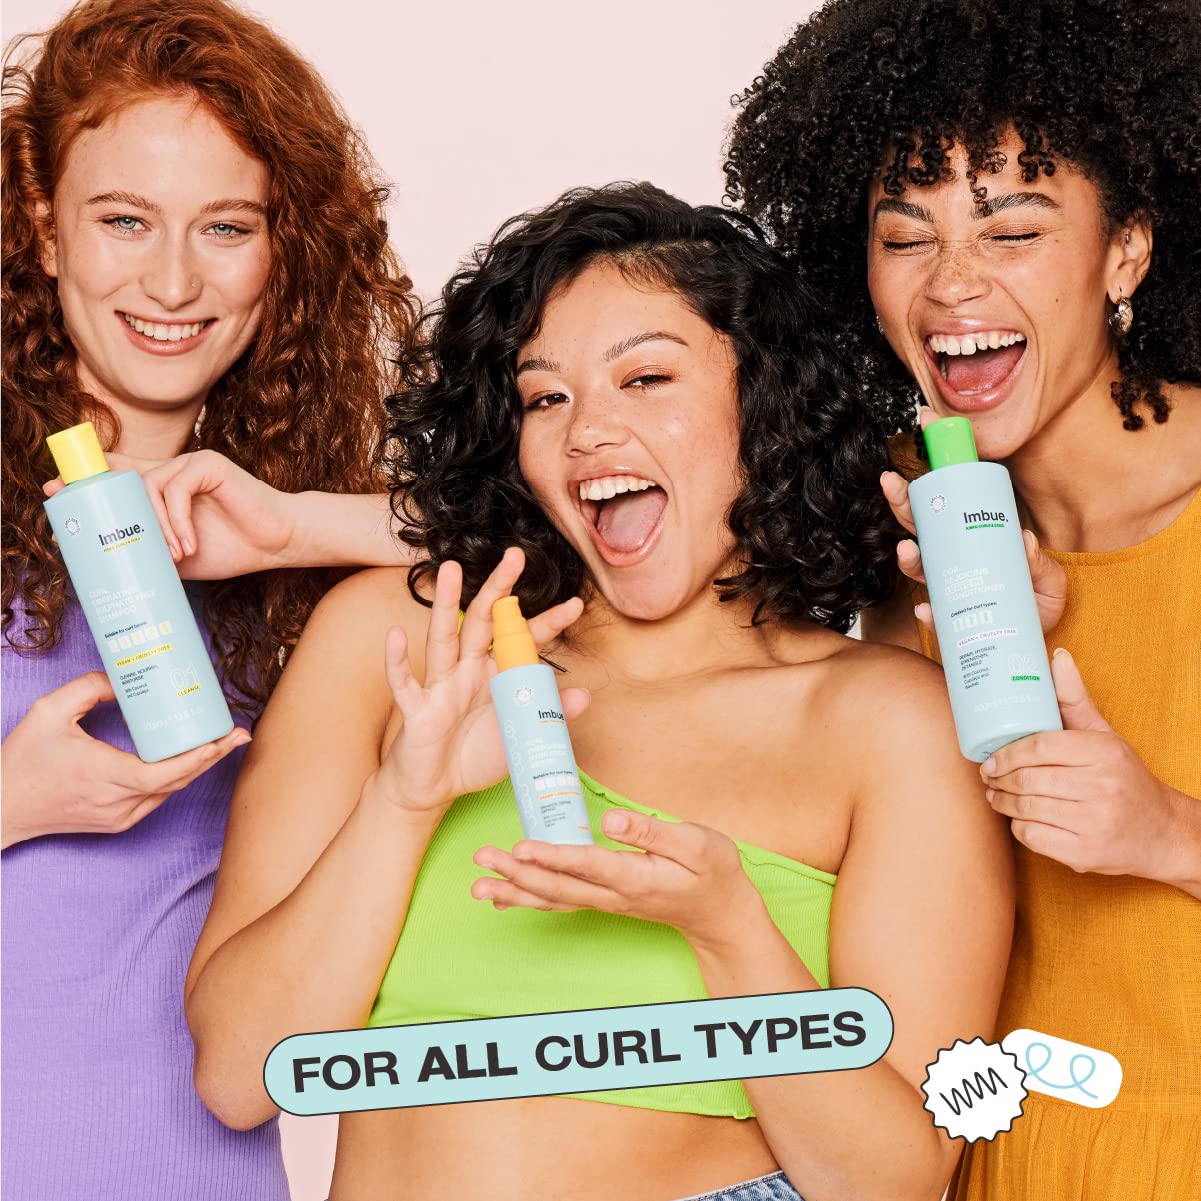 Imbue Curl Rejoicing Curly Hair Leave-in Conditioner For Dry Frizzy Wavy Curls & Coily Hair, 4A-4C Natural Hair Friendly, Embrace the Curl Movement, Curl Cream, Paraben Free, Cruelty Free, Vegan Hair